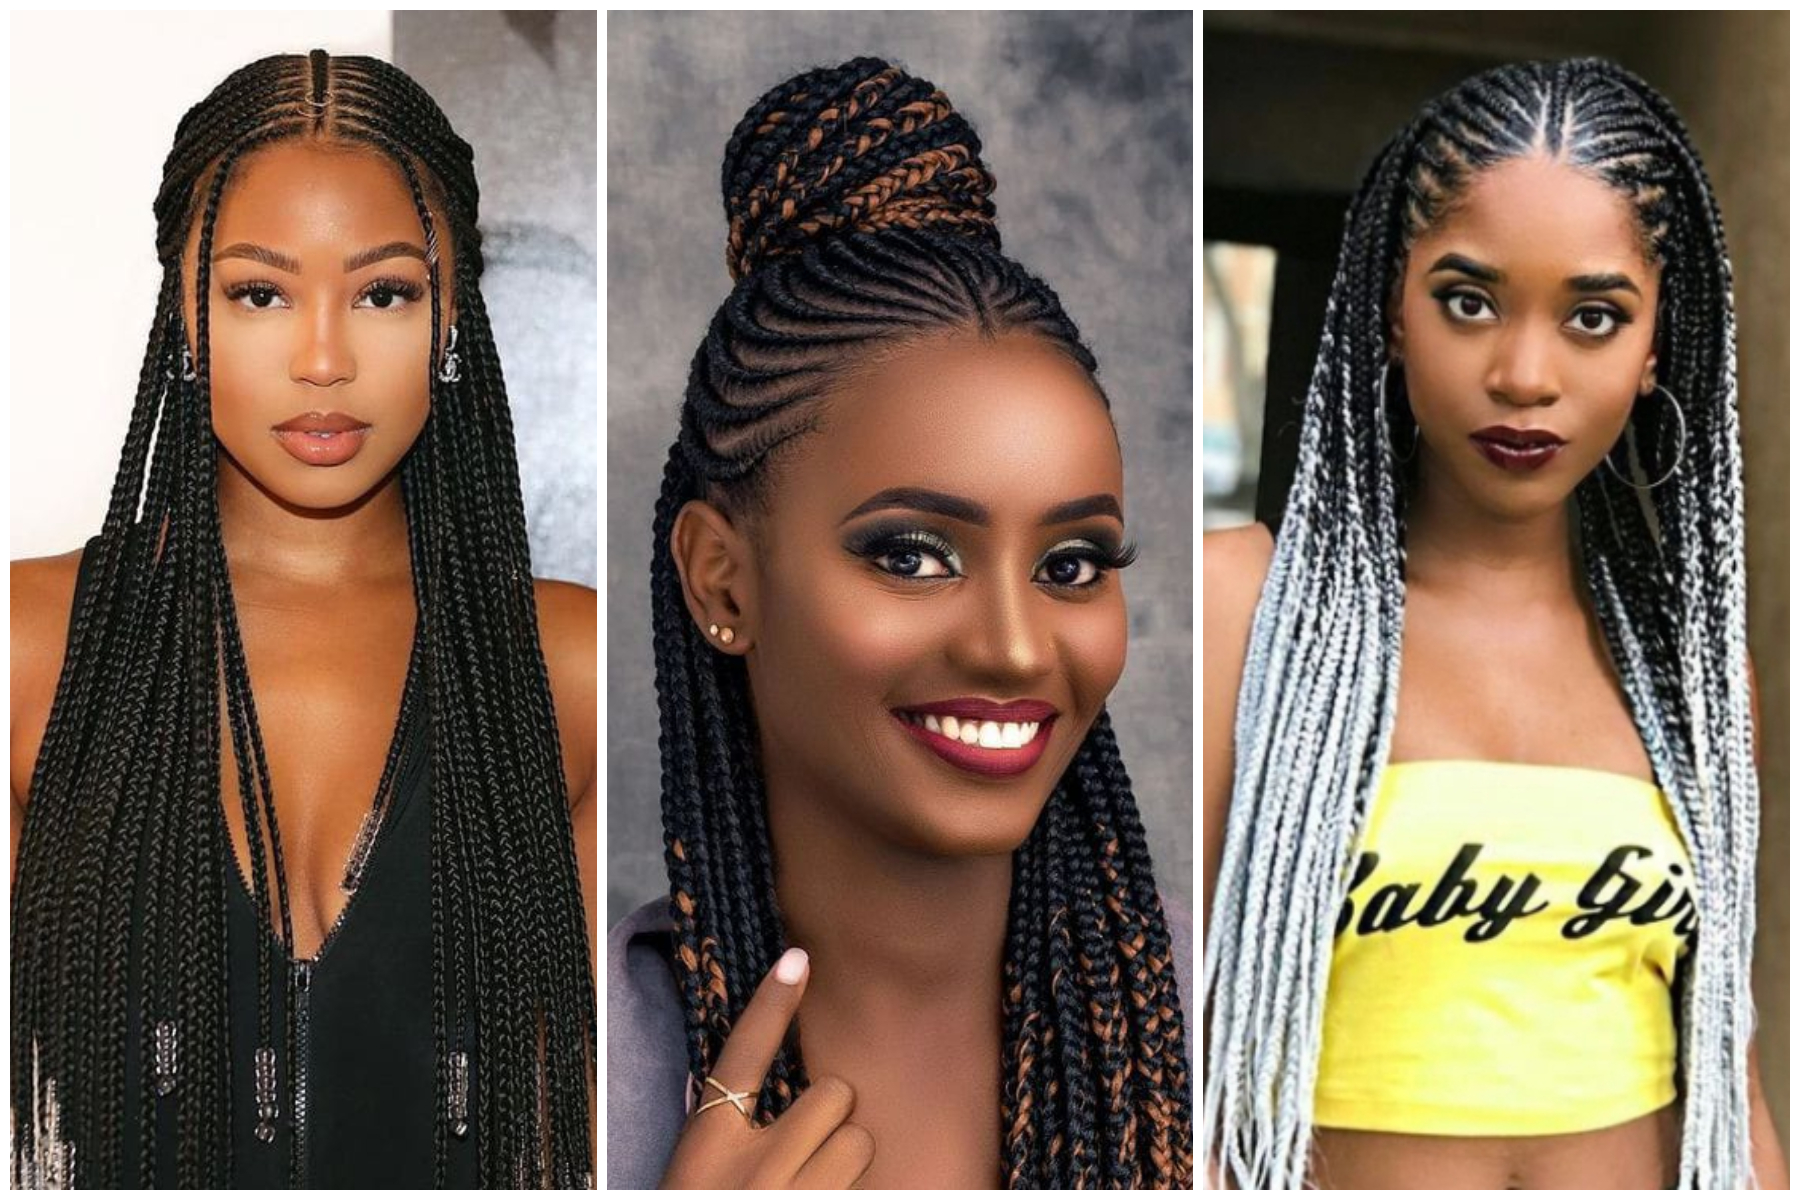 20 stunning tribal braids hairstyles to choose for that revamped look